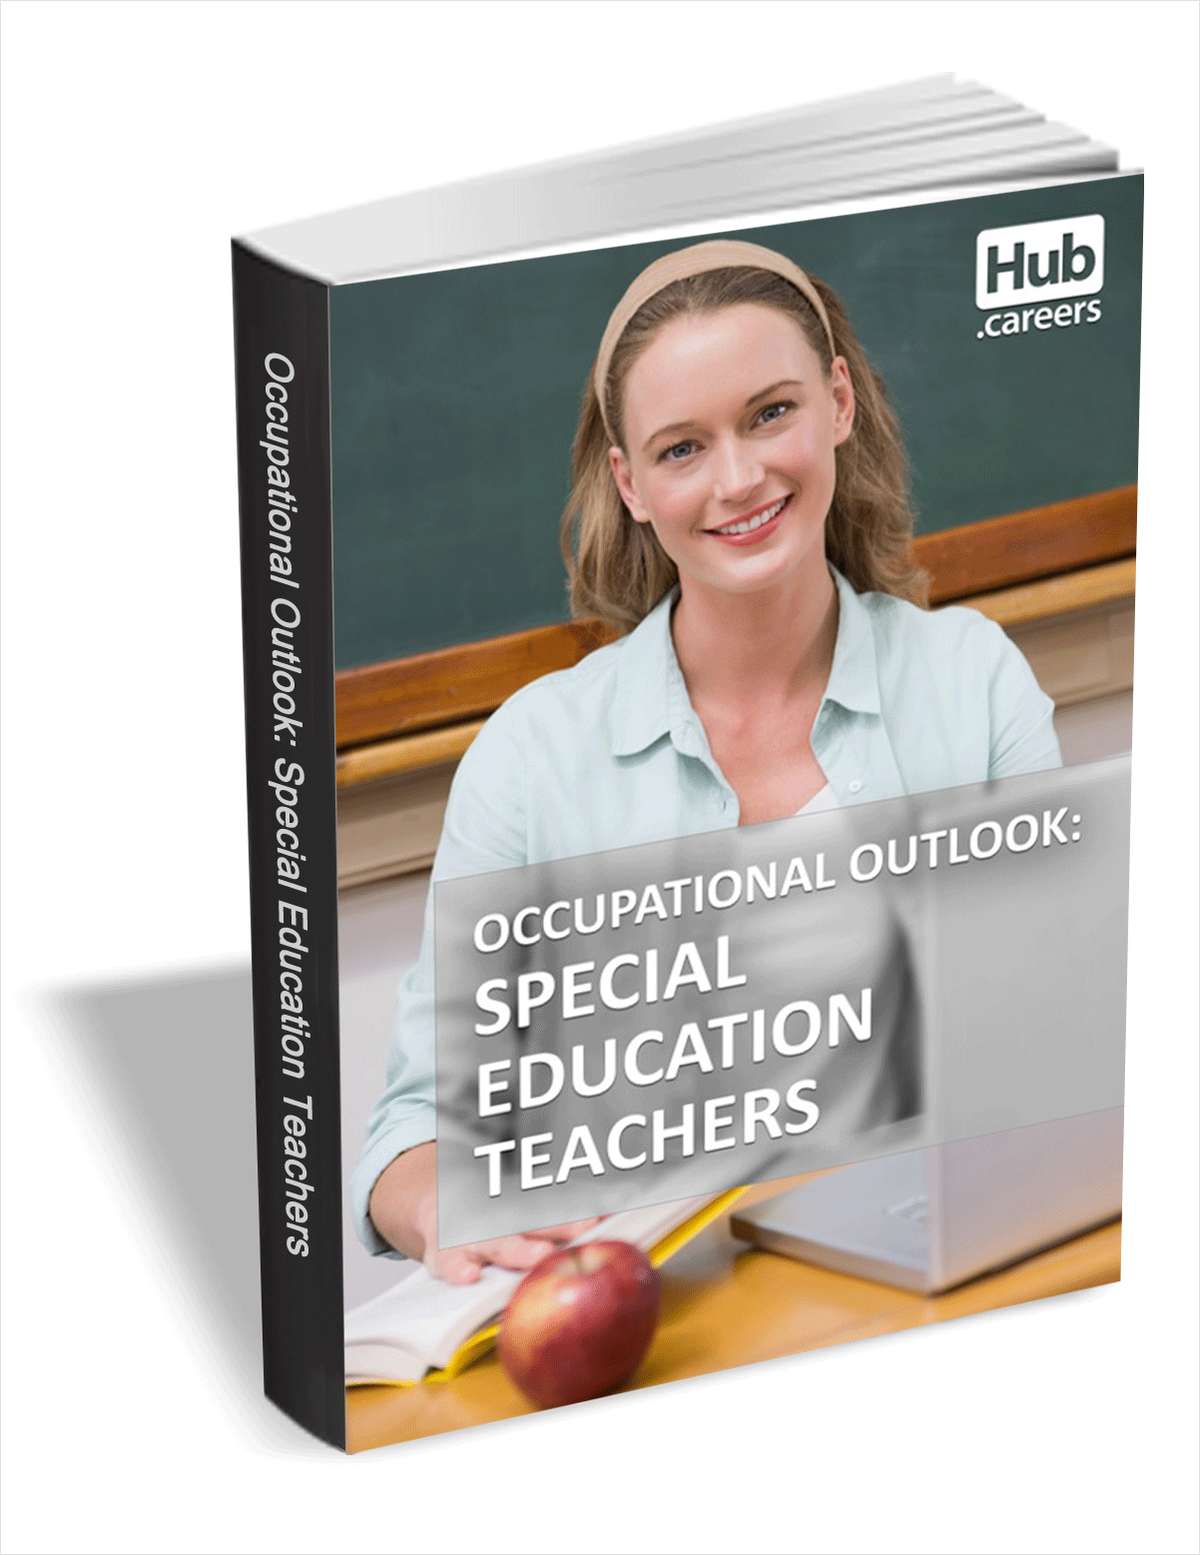 Special Education Teachers - Occupational Outlook